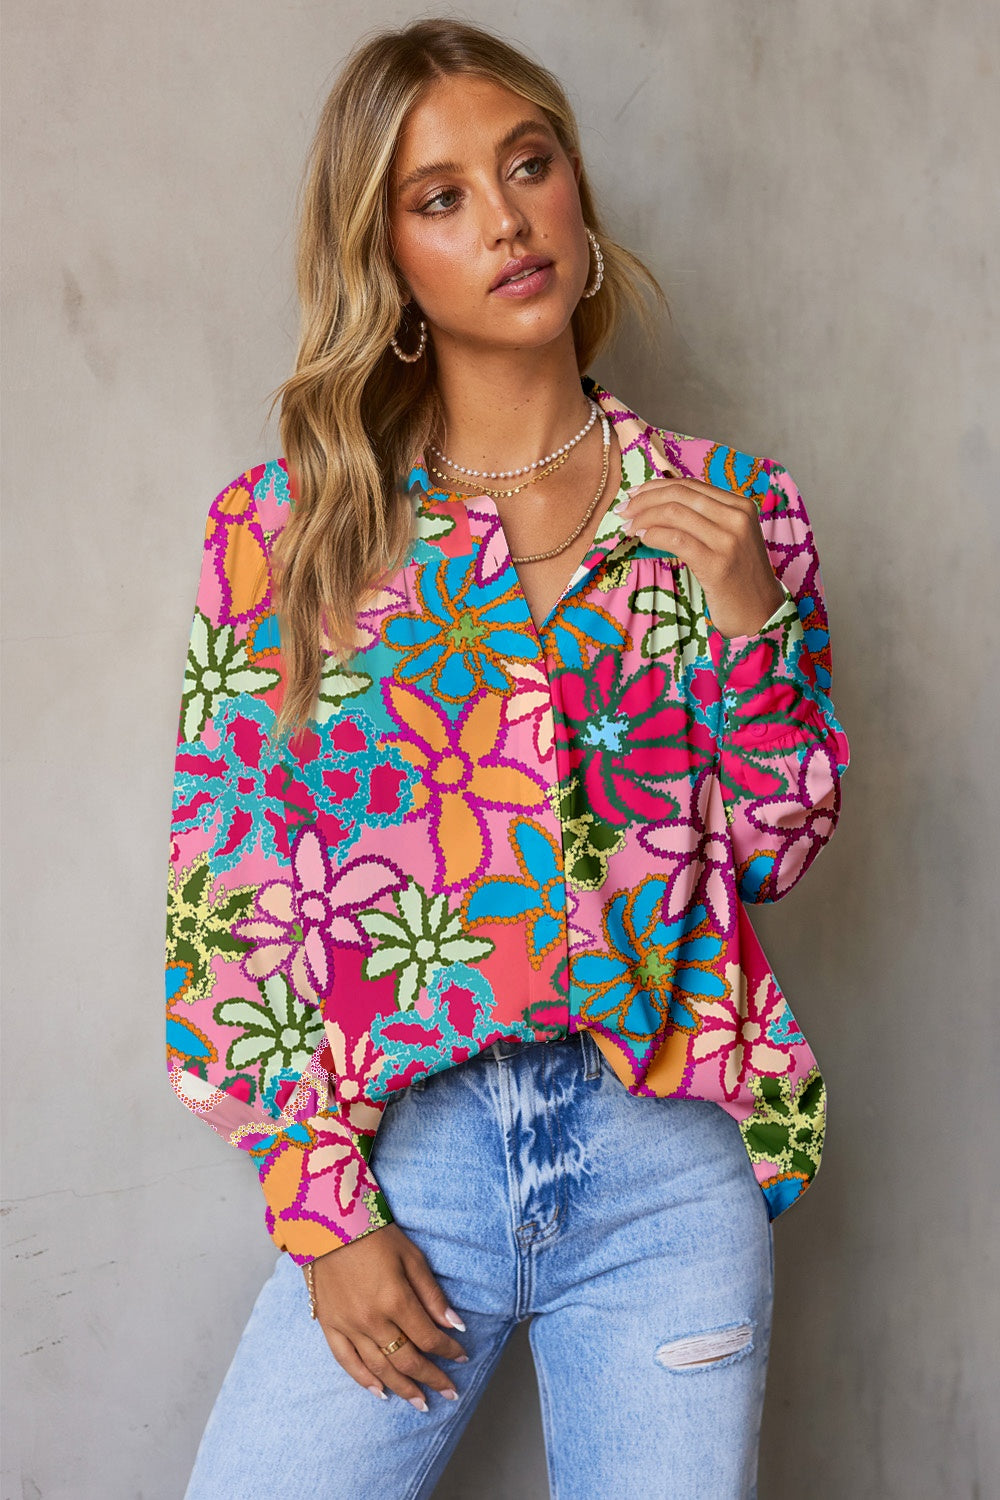 Floral Print Blouse Collared Neck Long Sleeve Shirt